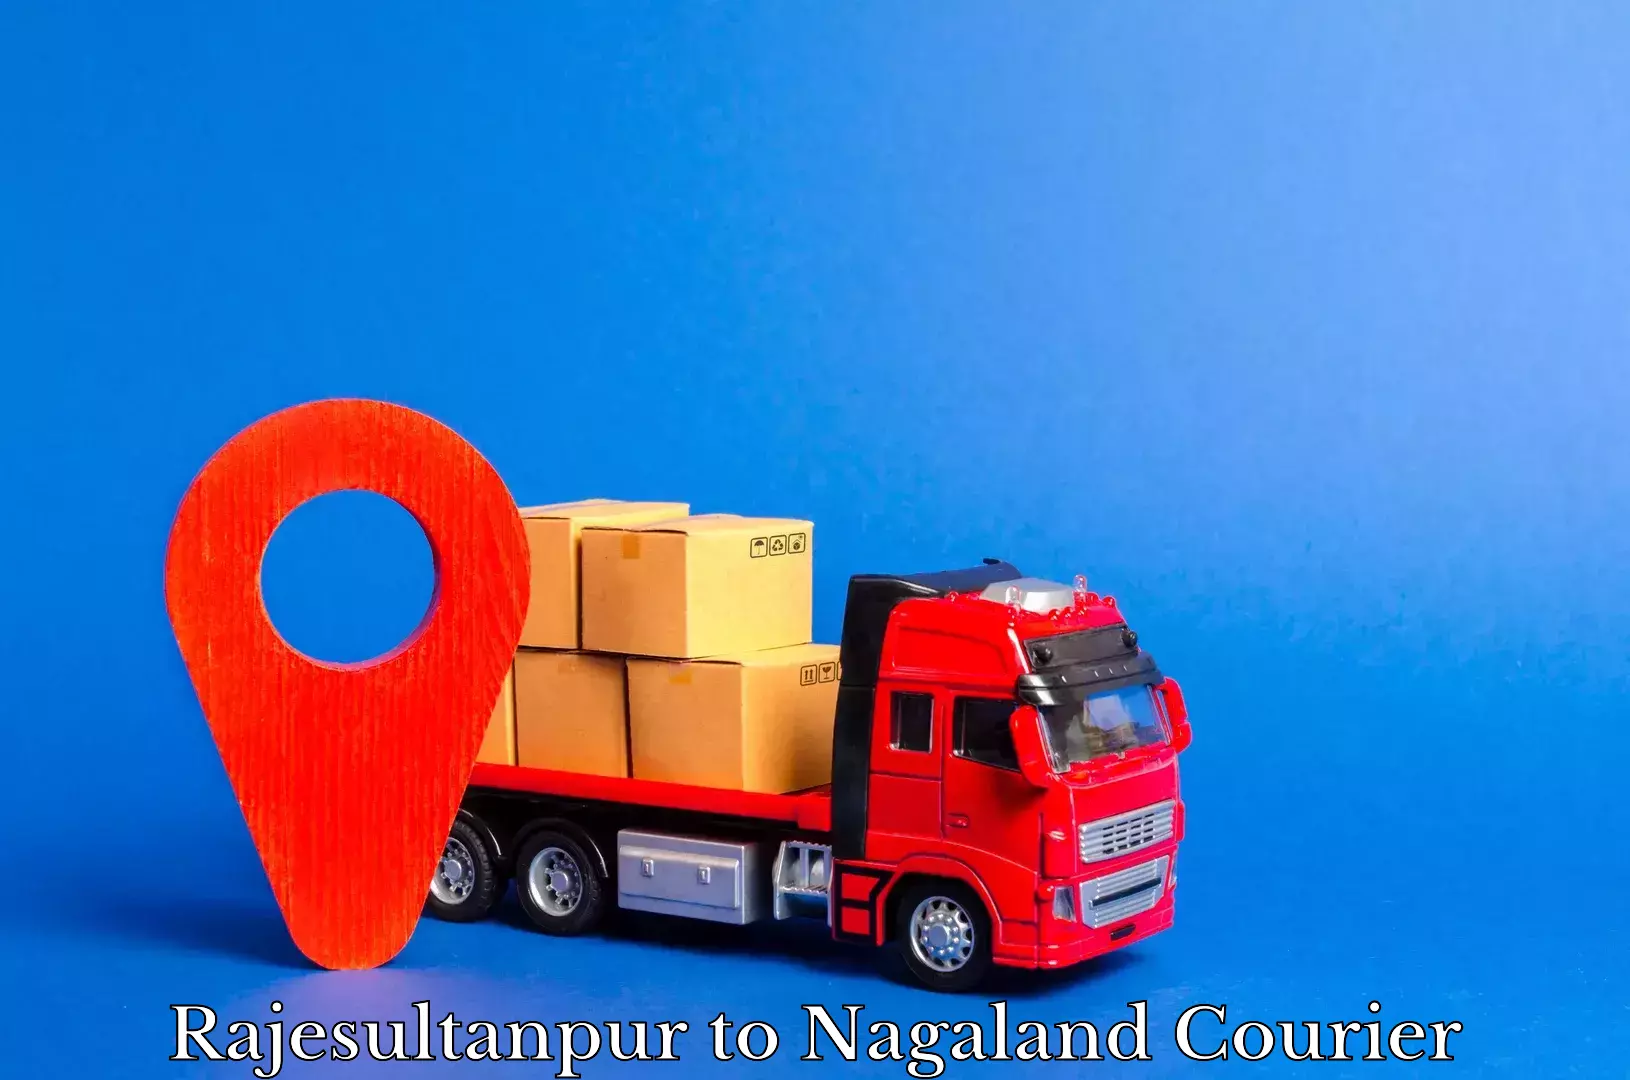 Multi-national courier services Rajesultanpur to Nagaland